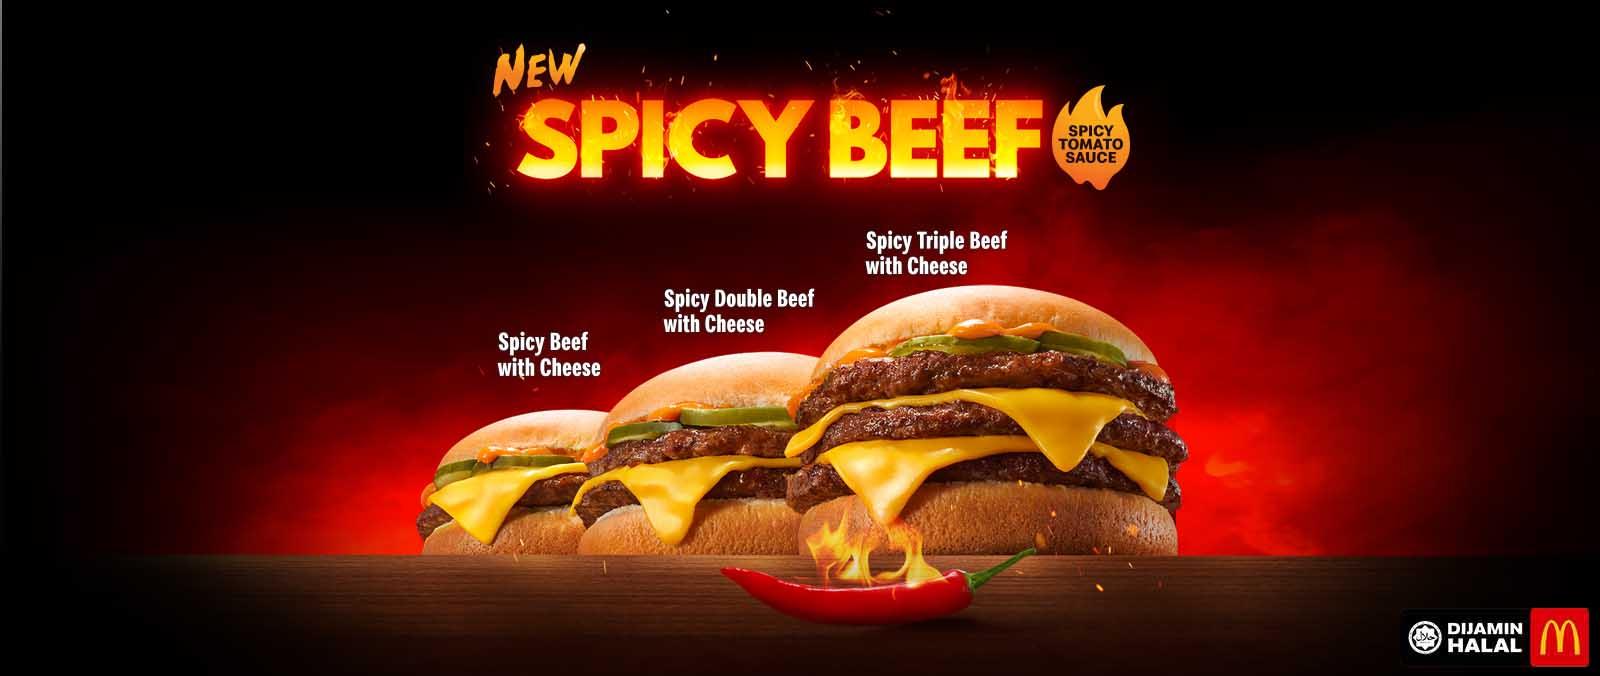 Spicy Beef Burgers with Cheese's image'